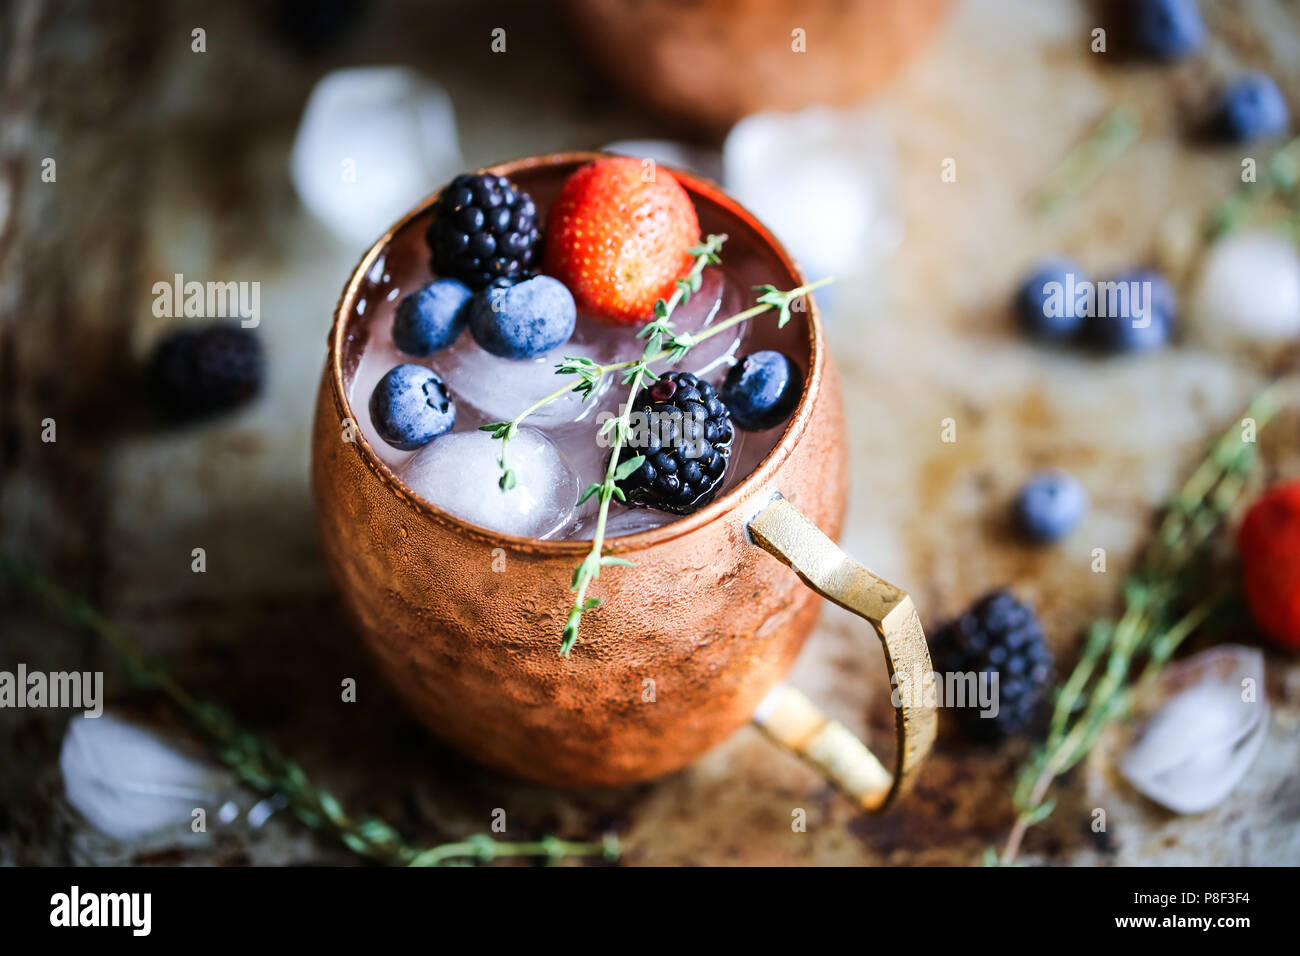 Summer berries moscow mule Stock Photo